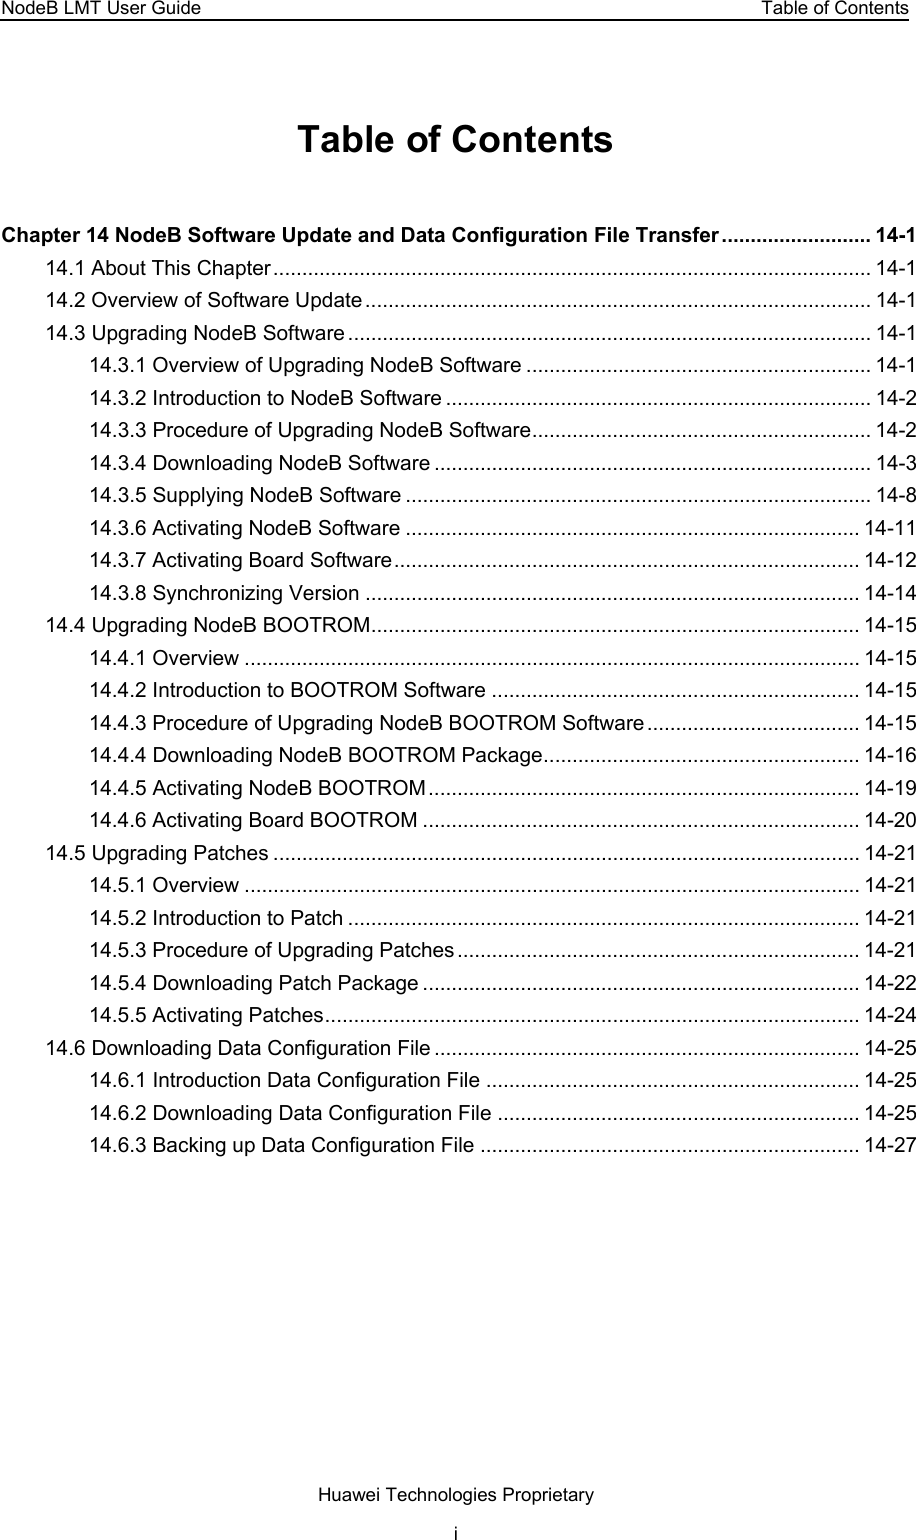 NodeB LMT User Guide  Table of Contents Table of Contents Chapter 14 NodeB Software Update and Data Configuration File Transfer .......................... 14-1 14.1 About This Chapter........................................................................................................ 14-1 14.2 Overview of Software Update........................................................................................ 14-1 14.3 Upgrading NodeB Software........................................................................................... 14-1 14.3.1 Overview of Upgrading NodeB Software ............................................................ 14-1 14.3.2 Introduction to NodeB Software .......................................................................... 14-2 14.3.3 Procedure of Upgrading NodeB Software........................................................... 14-2 14.3.4 Downloading NodeB Software ............................................................................ 14-3 14.3.5 Supplying NodeB Software ................................................................................. 14-8 14.3.6 Activating NodeB Software ............................................................................... 14-11 14.3.7 Activating Board Software................................................................................. 14-12 14.3.8 Synchronizing Version ...................................................................................... 14-14 14.4 Upgrading NodeB BOOTROM..................................................................................... 14-15 14.4.1 Overview ........................................................................................................... 14-15 14.4.2 Introduction to BOOTROM Software ................................................................ 14-15 14.4.3 Procedure of Upgrading NodeB BOOTROM Software..................................... 14-15 14.4.4 Downloading NodeB BOOTROM Package....................................................... 14-16 14.4.5 Activating NodeB BOOTROM........................................................................... 14-19 14.4.6 Activating Board BOOTROM ............................................................................ 14-20 14.5 Upgrading Patches ...................................................................................................... 14-21 14.5.1 Overview ........................................................................................................... 14-21 14.5.2 Introduction to Patch ......................................................................................... 14-21 14.5.3 Procedure of Upgrading Patches...................................................................... 14-21 14.5.4 Downloading Patch Package ............................................................................ 14-22 14.5.5 Activating Patches............................................................................................. 14-24 14.6 Downloading Data Configuration File .......................................................................... 14-25 14.6.1 Introduction Data Configuration File ................................................................. 14-25 14.6.2 Downloading Data Configuration File ............................................................... 14-25 14.6.3 Backing up Data Configuration File .................................................................. 14-27 Huawei Technologies Proprietary i 